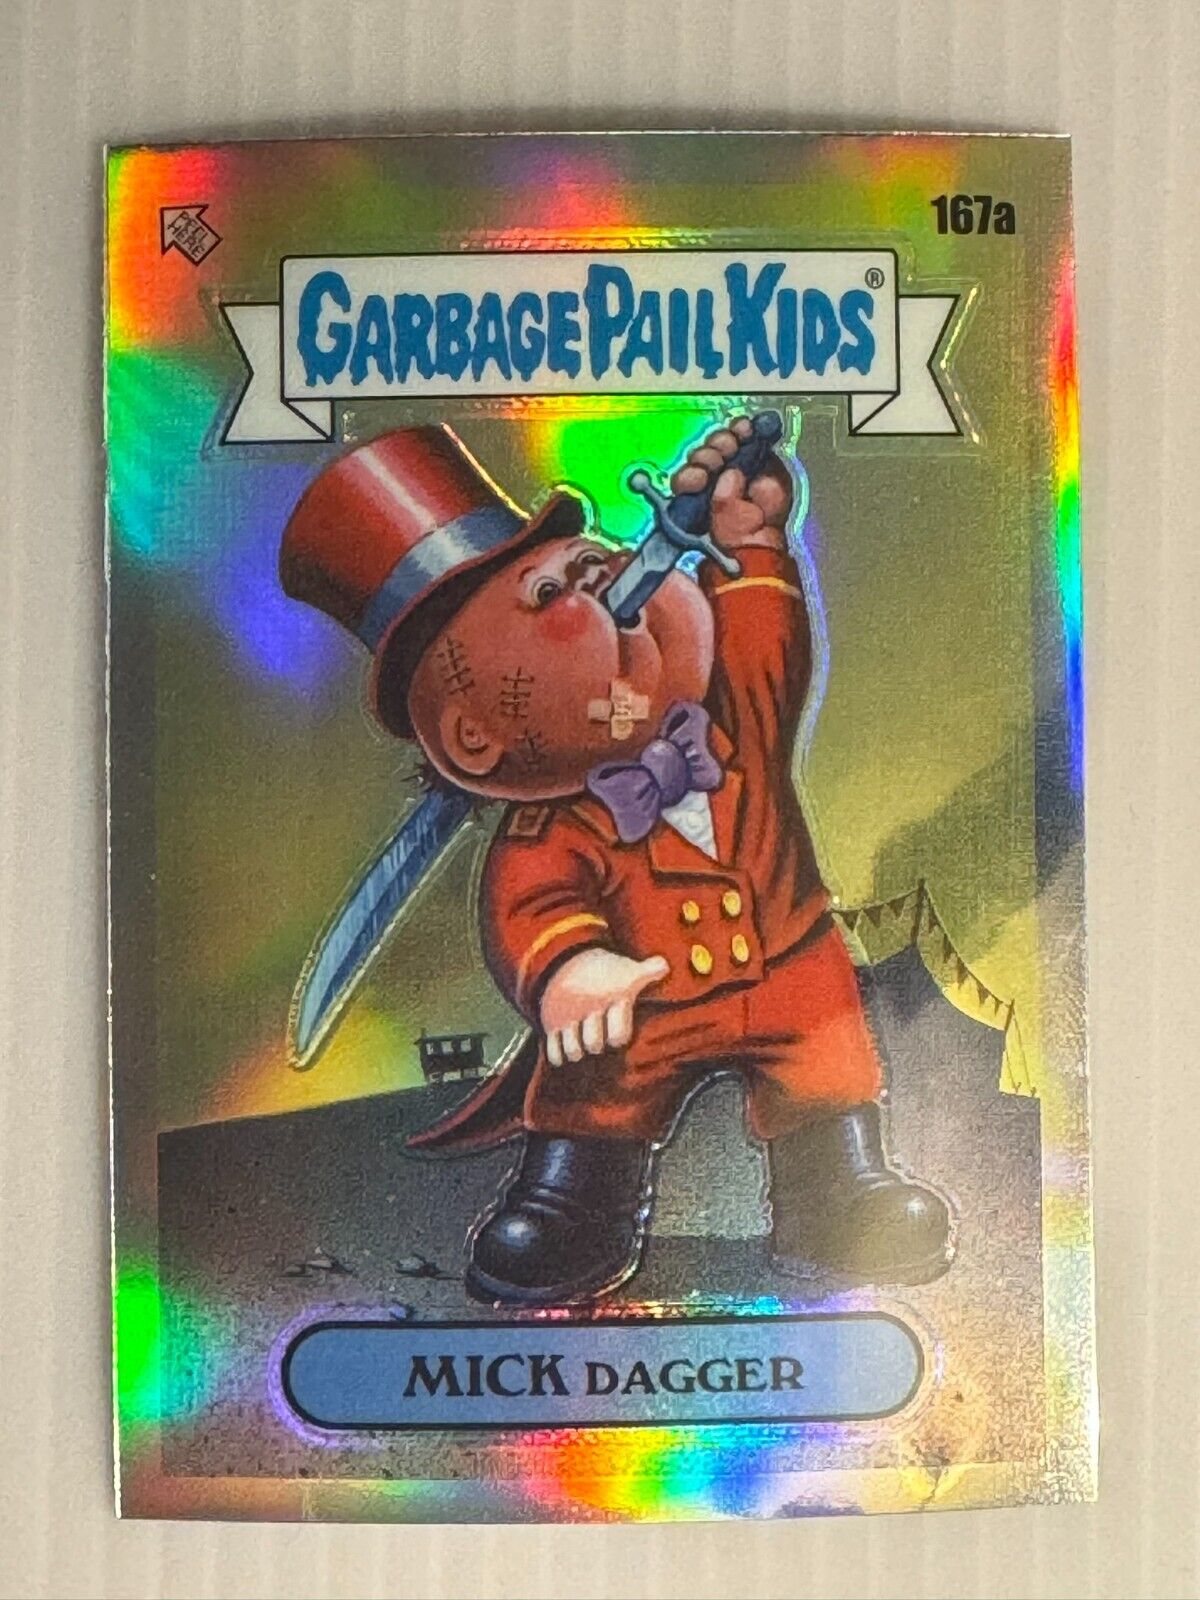 2022 Topps Chrome Garbage Pail Kids Series 5 Silver Refractor - Select from List